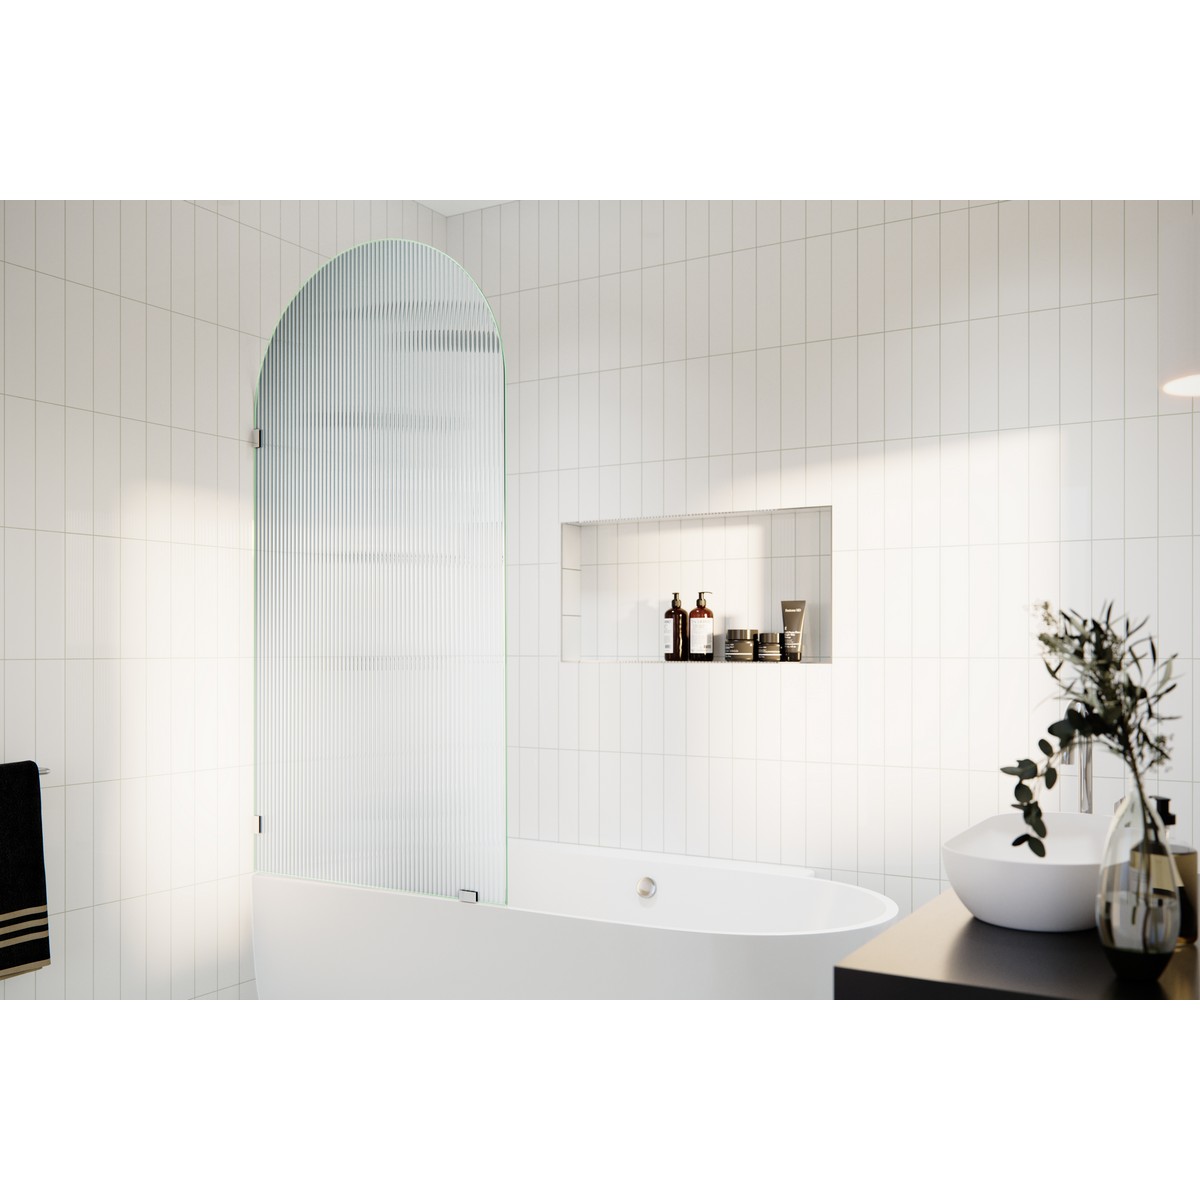 GLASS WAREHOUSE B-FL-ARC-34 MAVEN 34 W X 66 3/4 H SINGLE FIXED FRAMELESS ARCHED FLUTED FROSTED BATHTUB PANEL